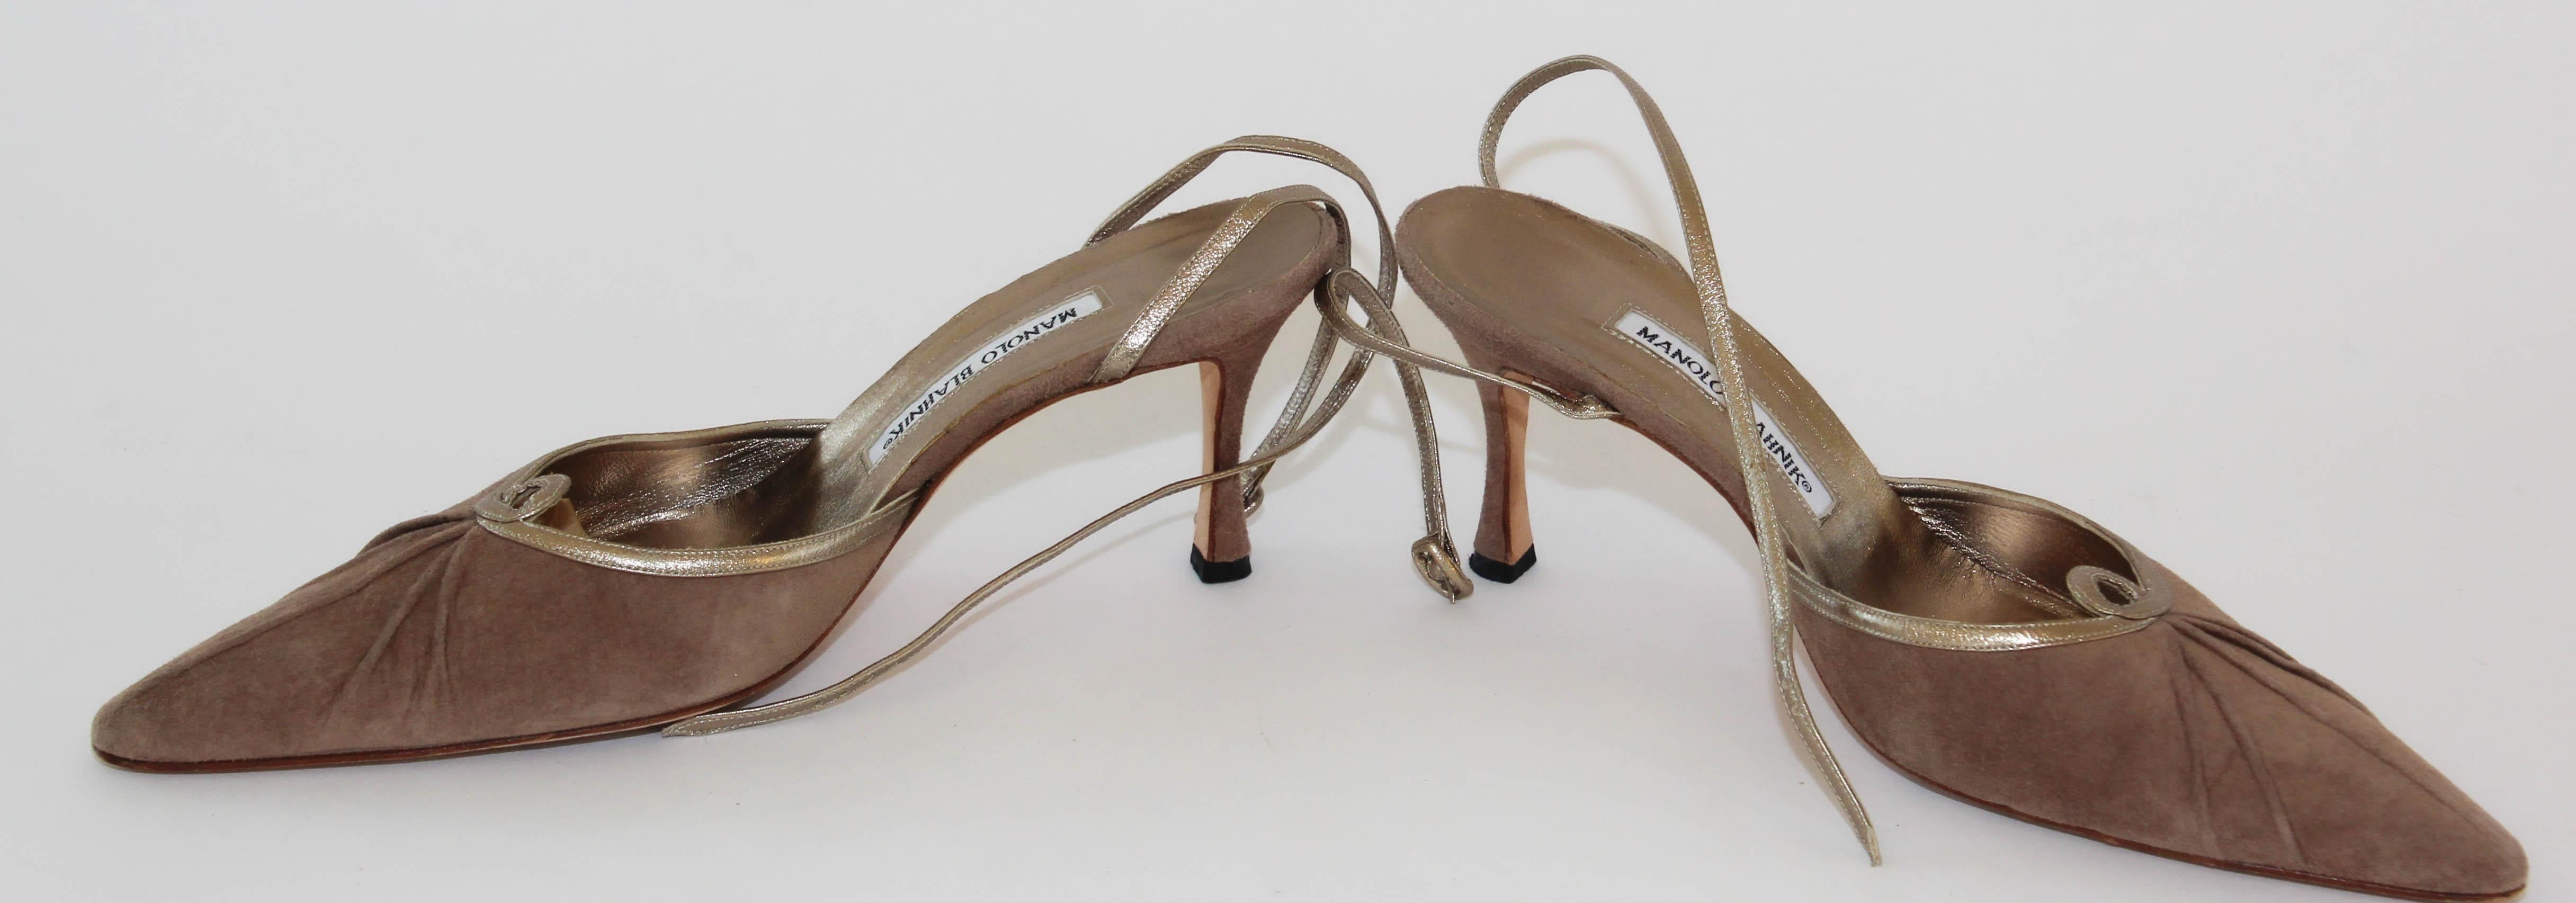 Manolo Blahnik Vintage Suede Shoes With Leather Ankle Straps Size 40 For Sale 5